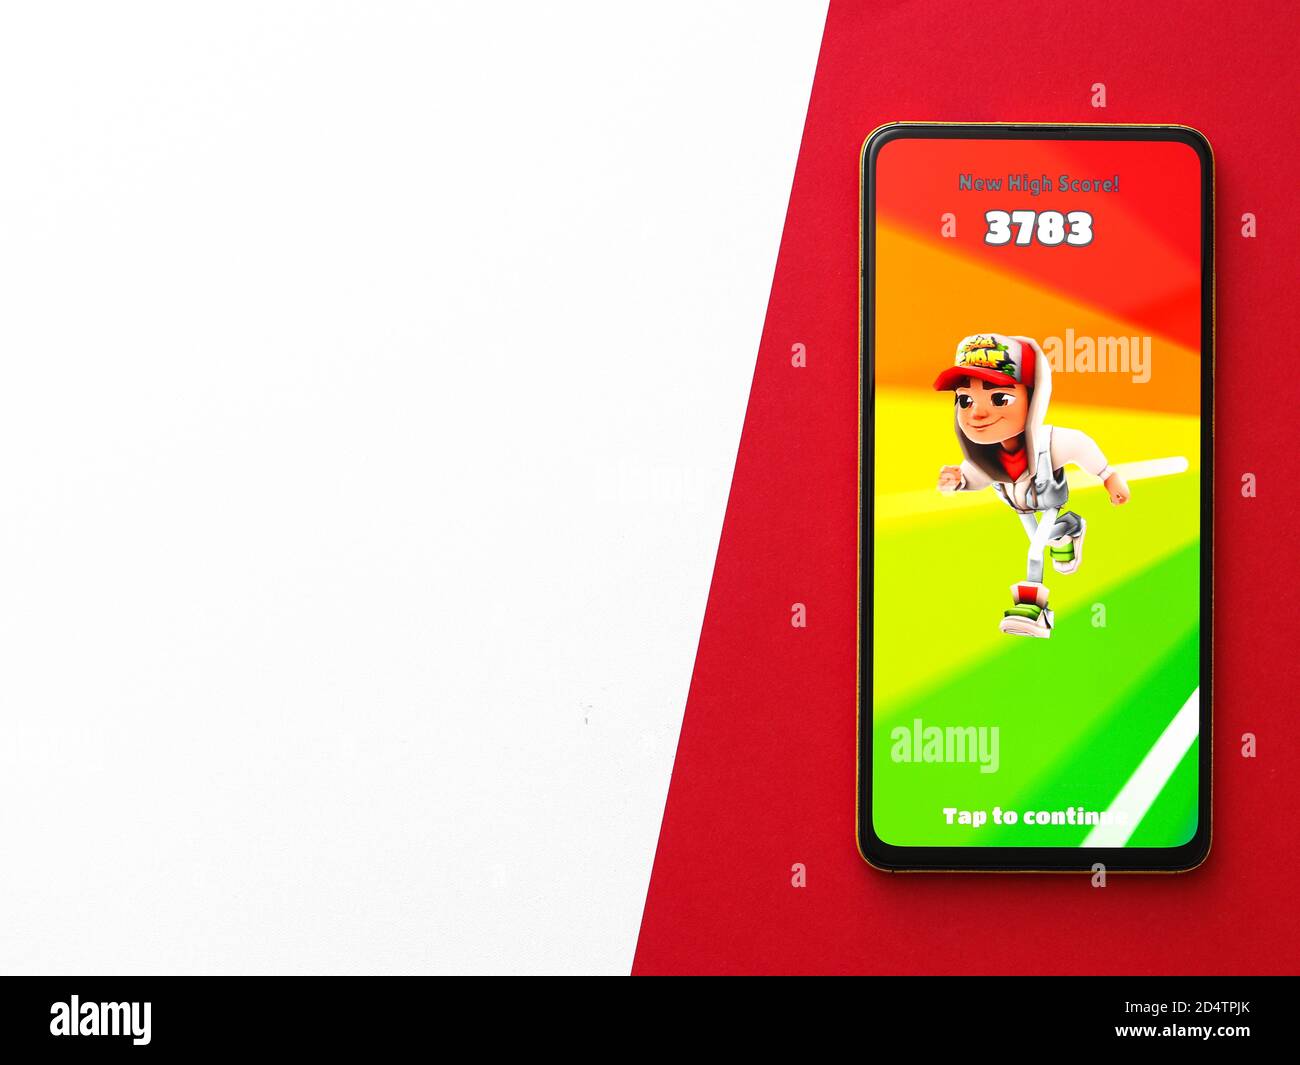 Ryazan, Russia - May 03, 2018: Subway Surfers mobile app on the display of  tablet PC Stock Photo - Alamy